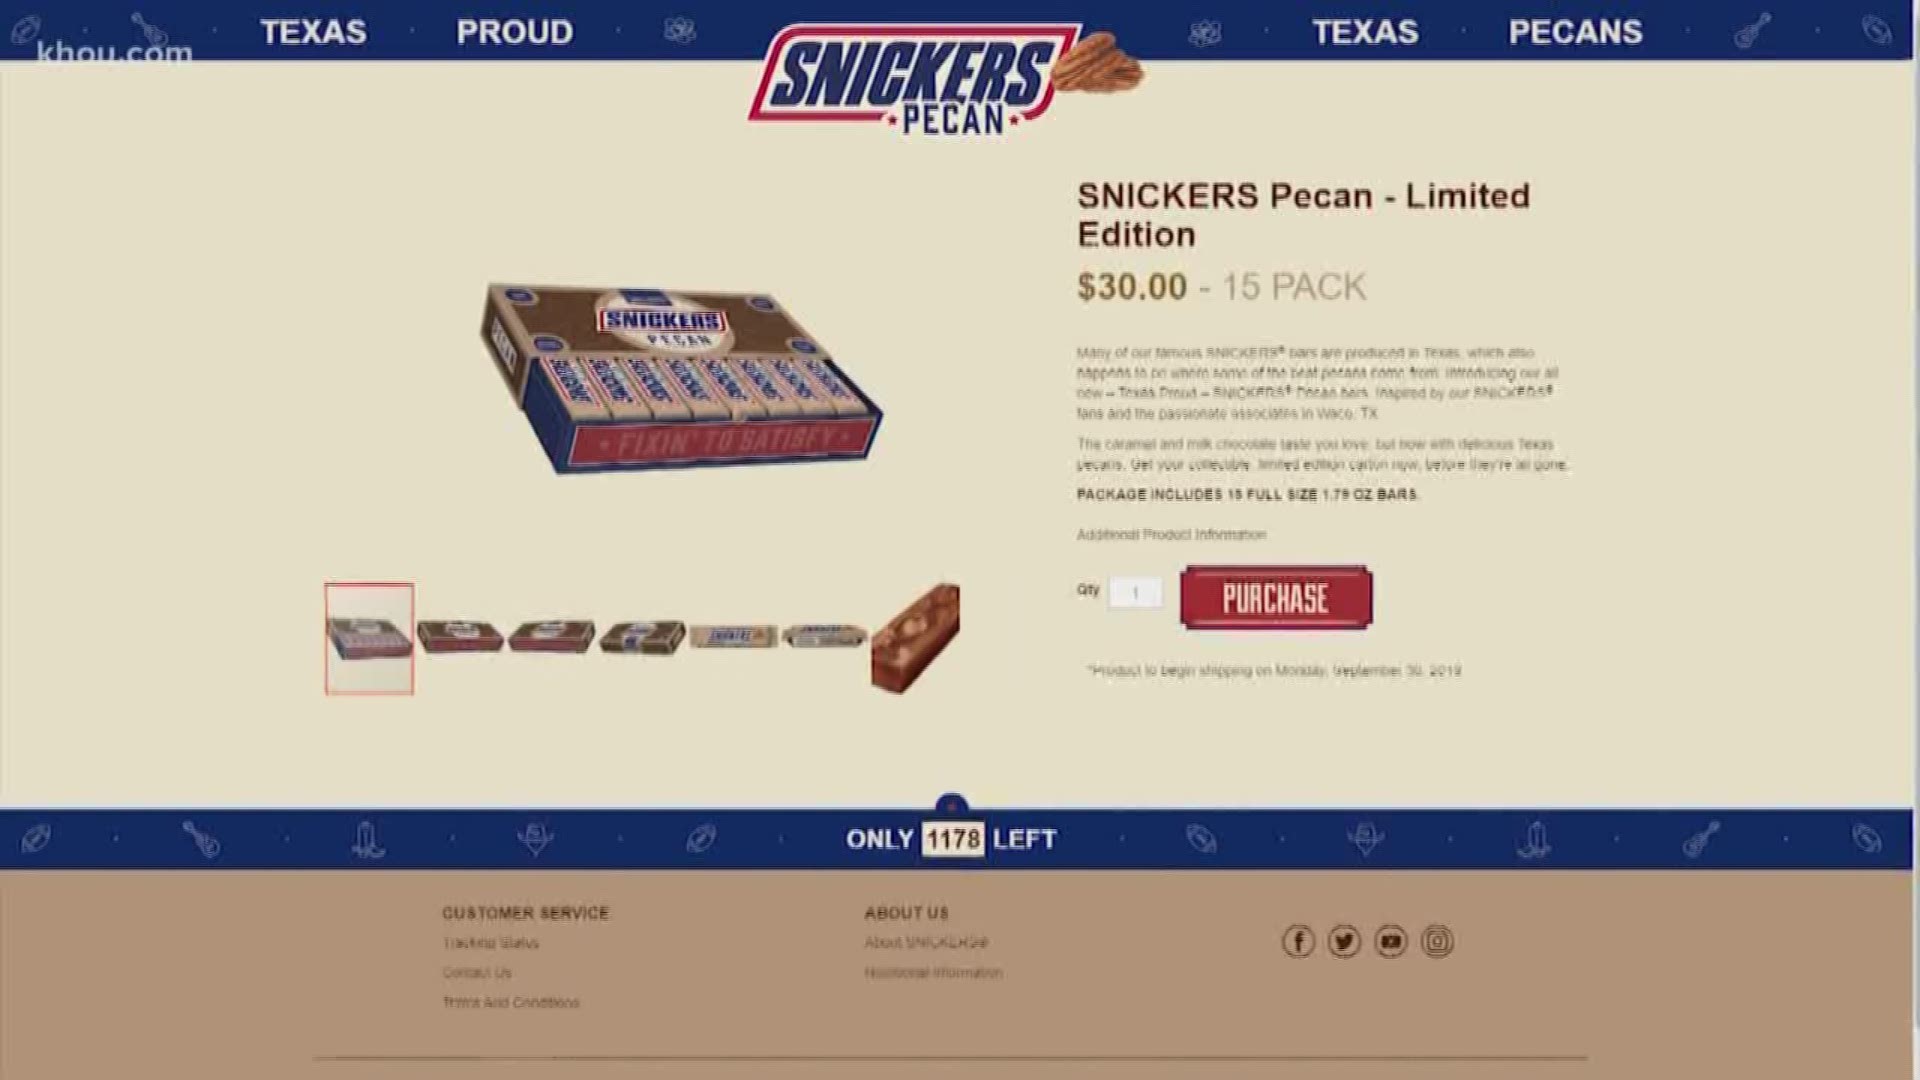 The brand-new Snickers candy bar featuring pecans is already a hit!